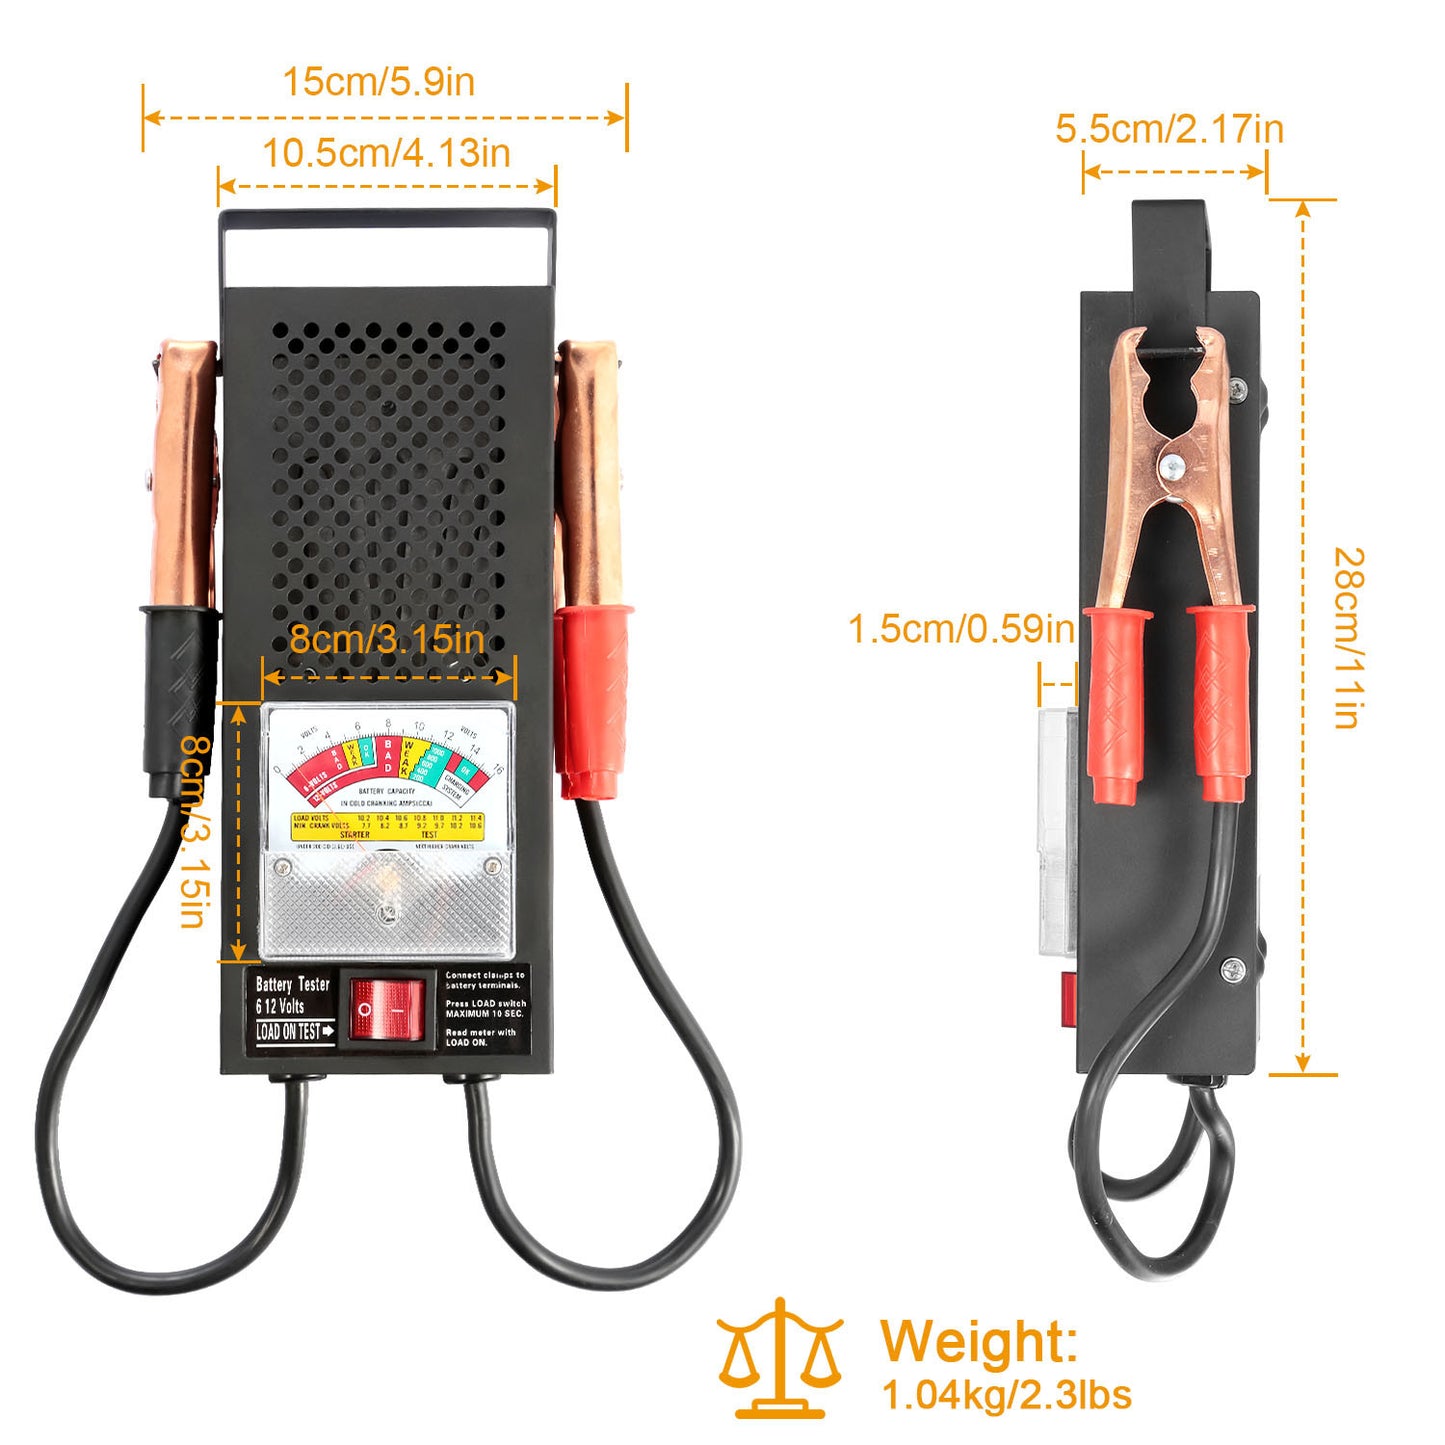 Battery Tester with Heavy Duty Insulated Copper Clips